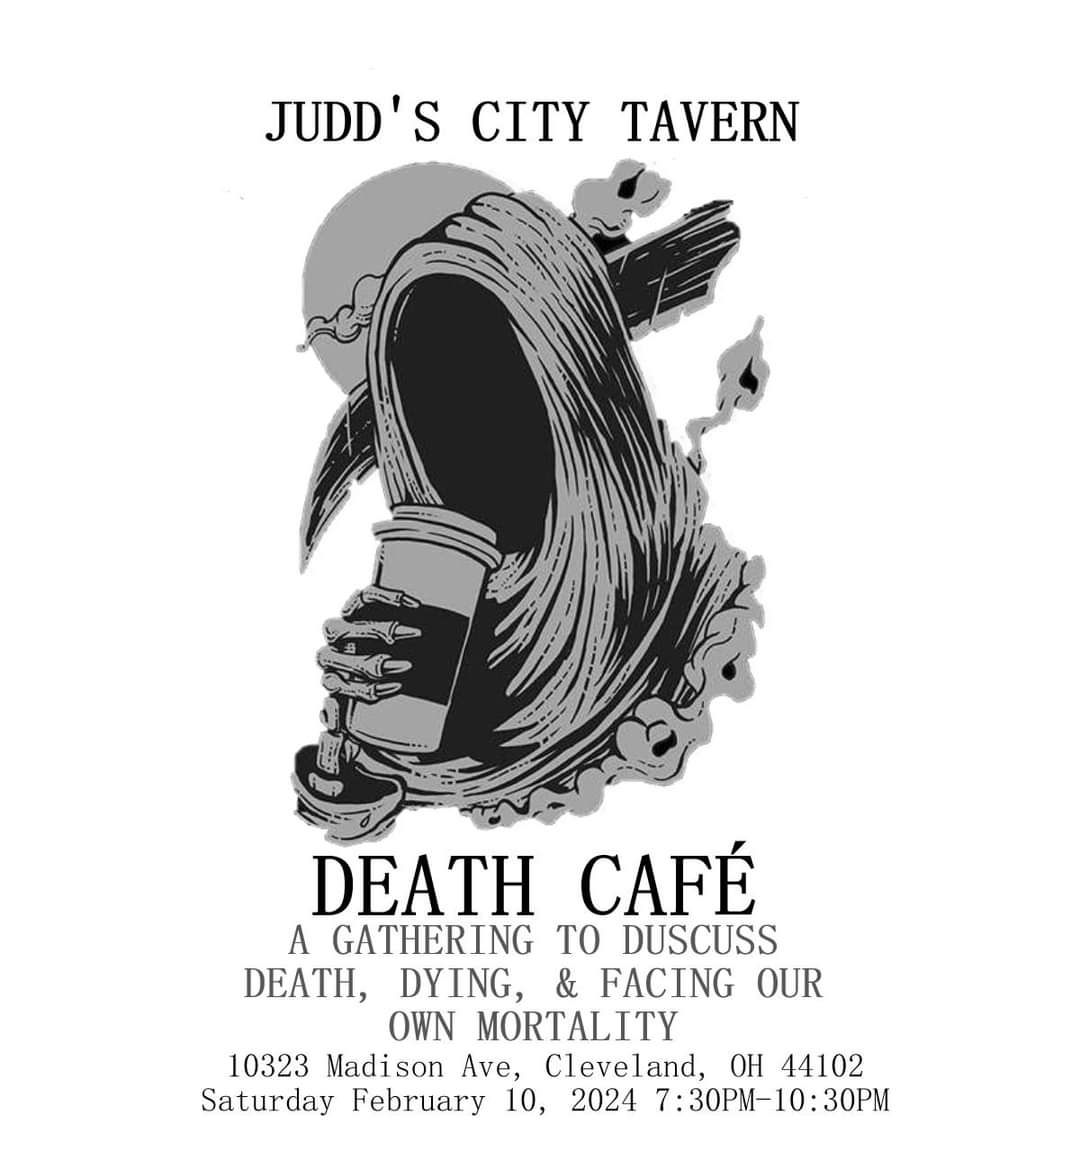 Cleveland Death Cafe at Judds City tavern by the Cleveland Death Society 